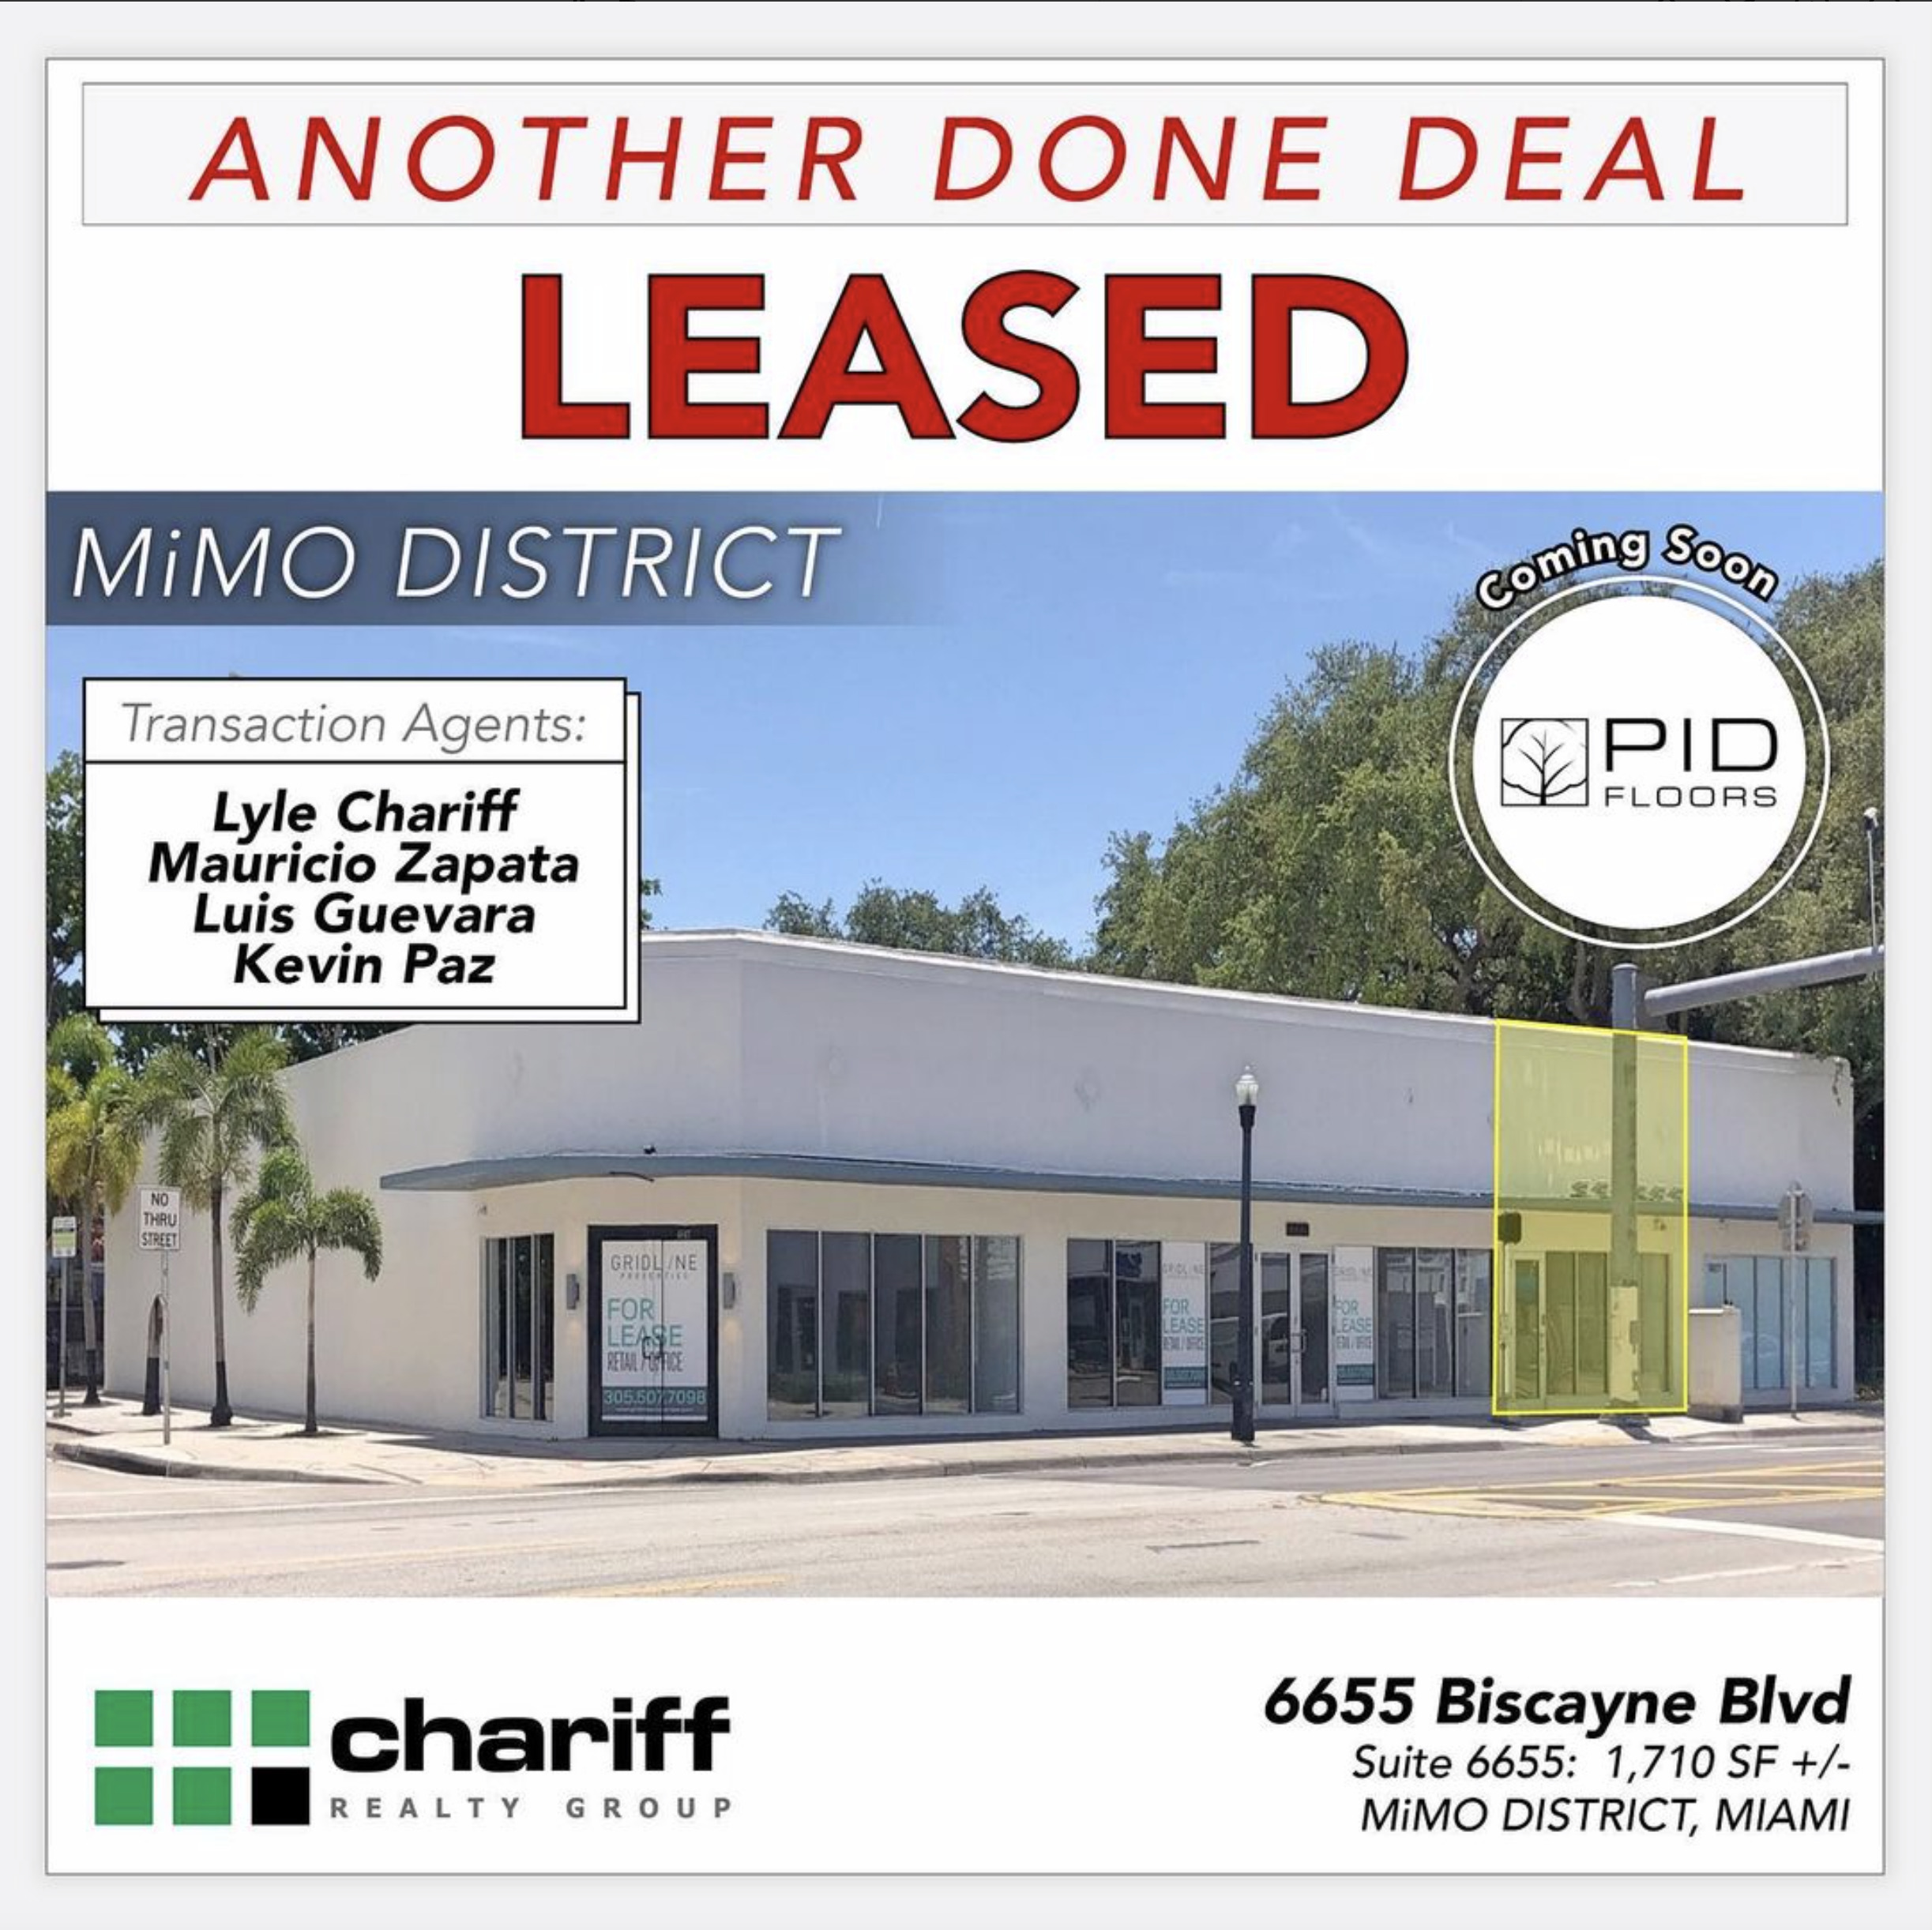 6655 Biscayne Blvd - Another Done Deal-Leased-MiMo District - Miami-Florida -33138 -Chariff Realty Group